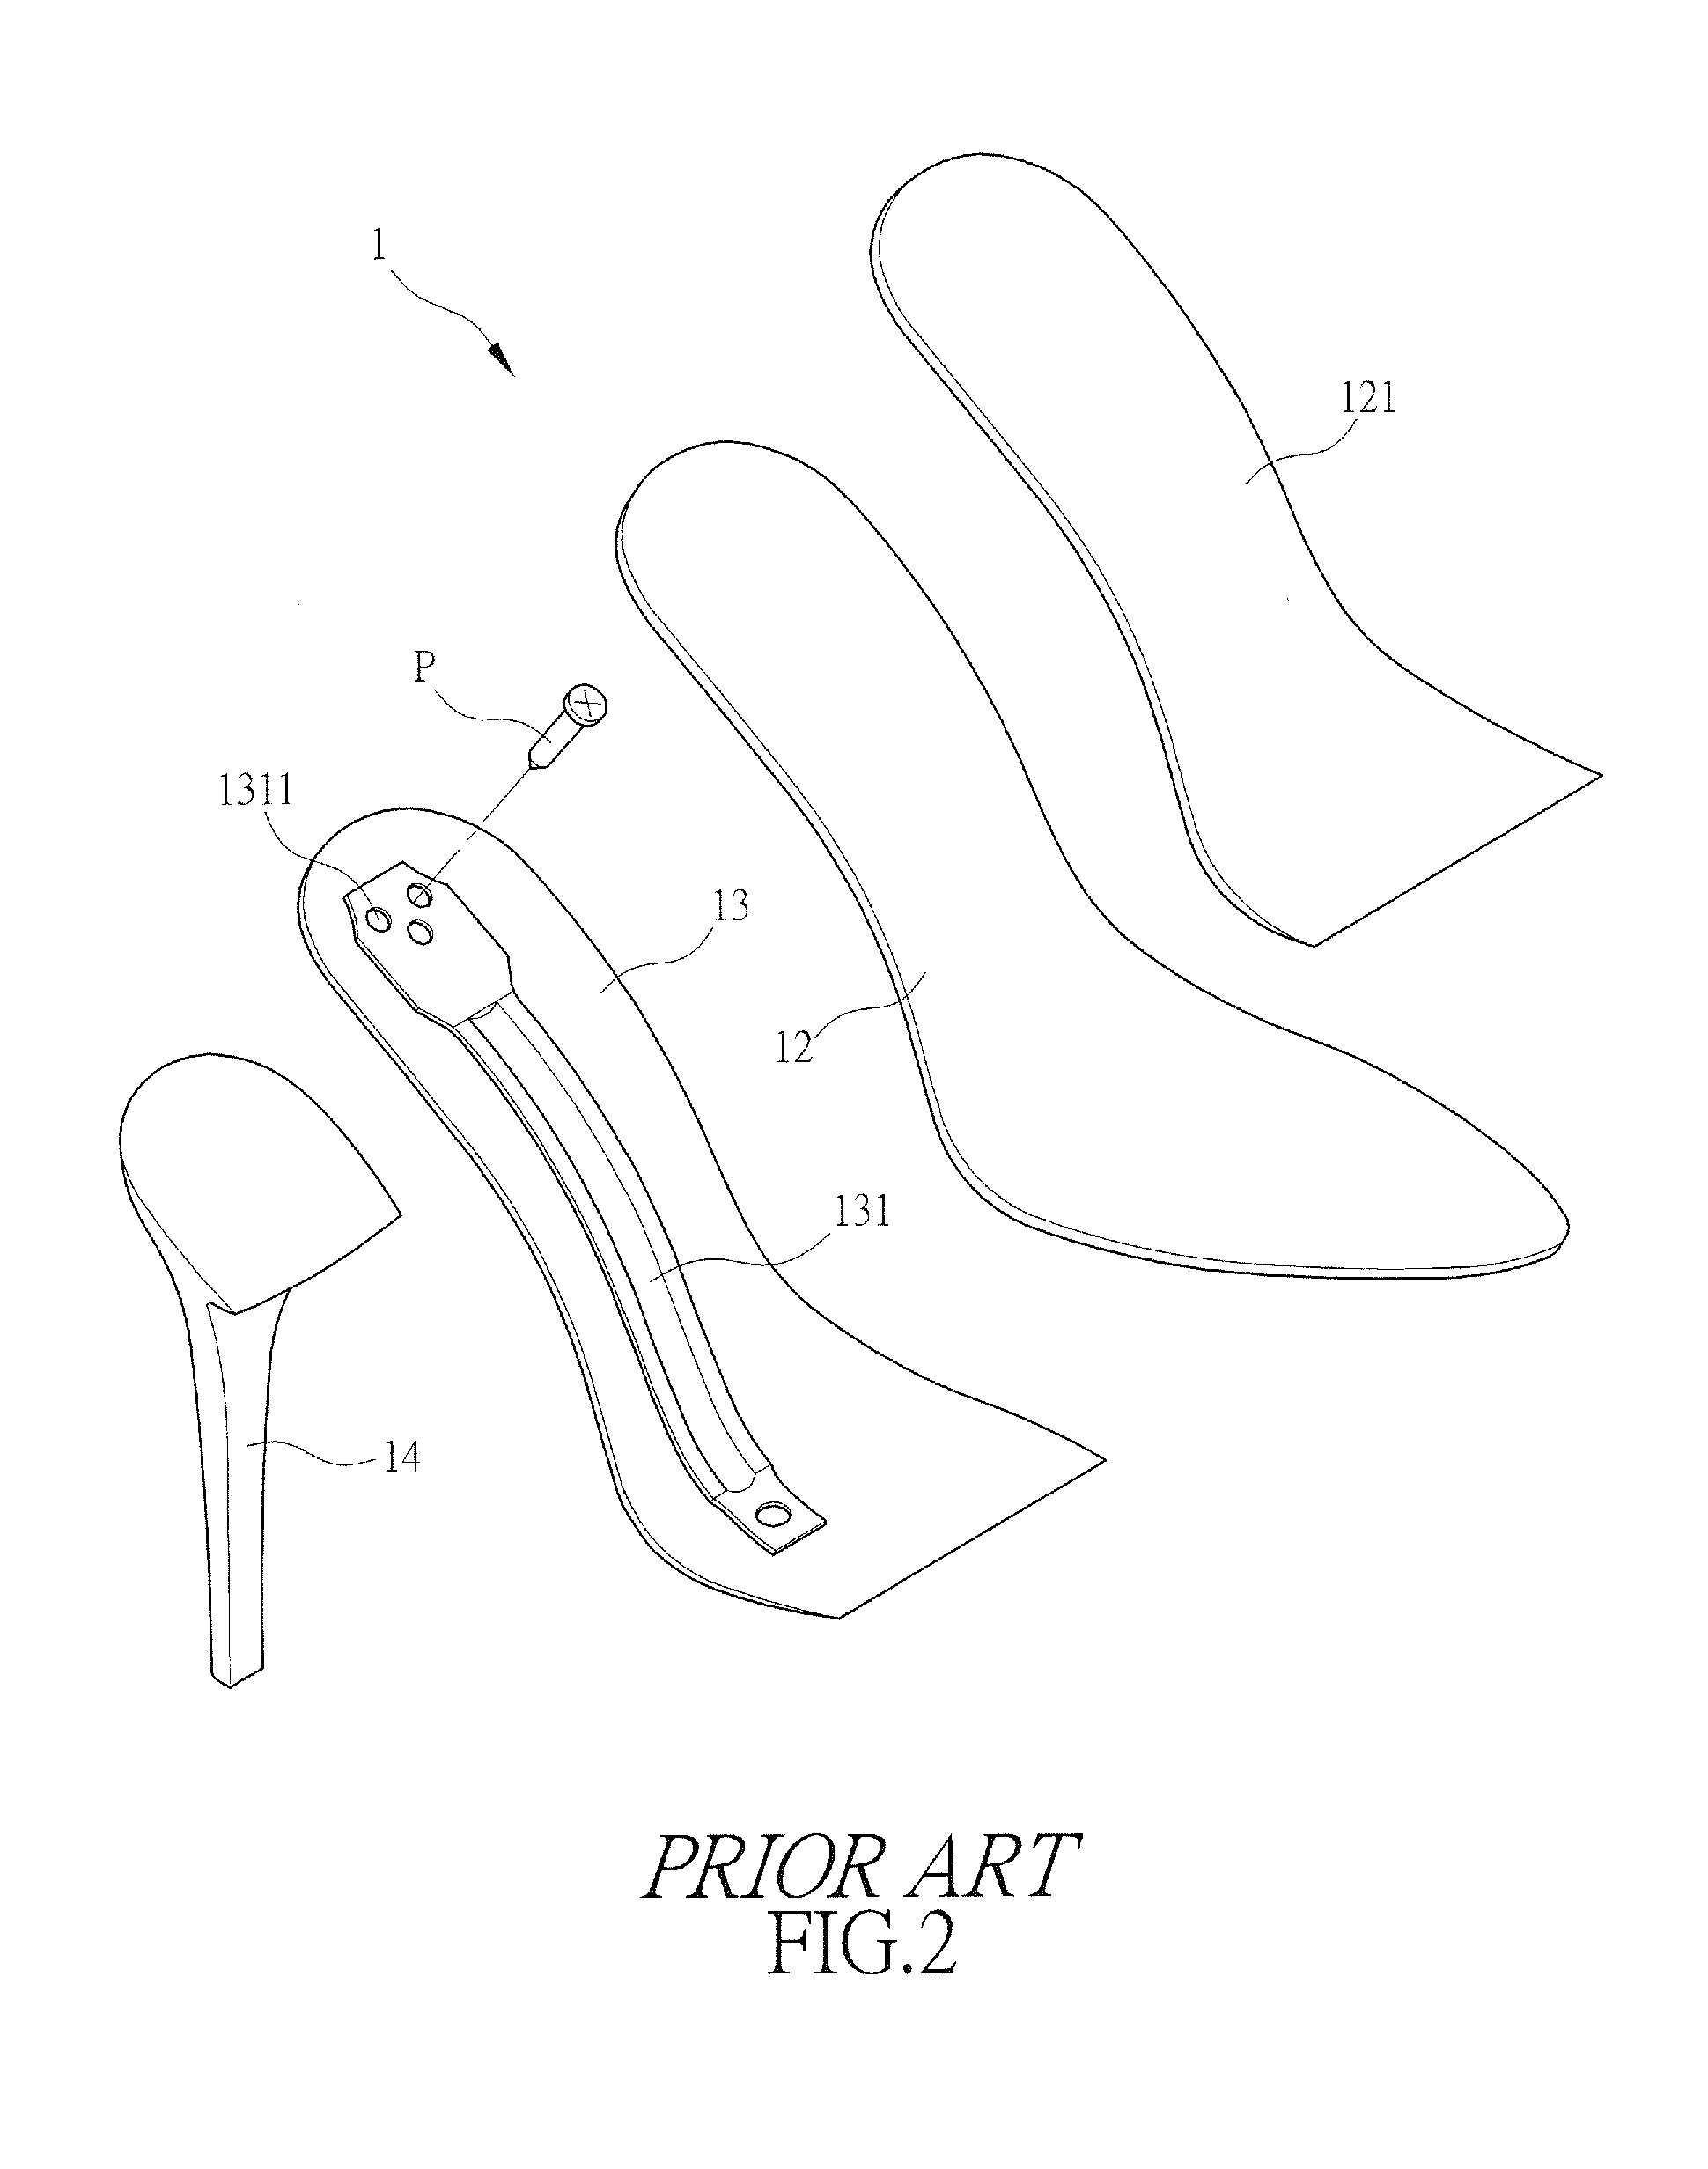 Structure of High-Heeled Shoe